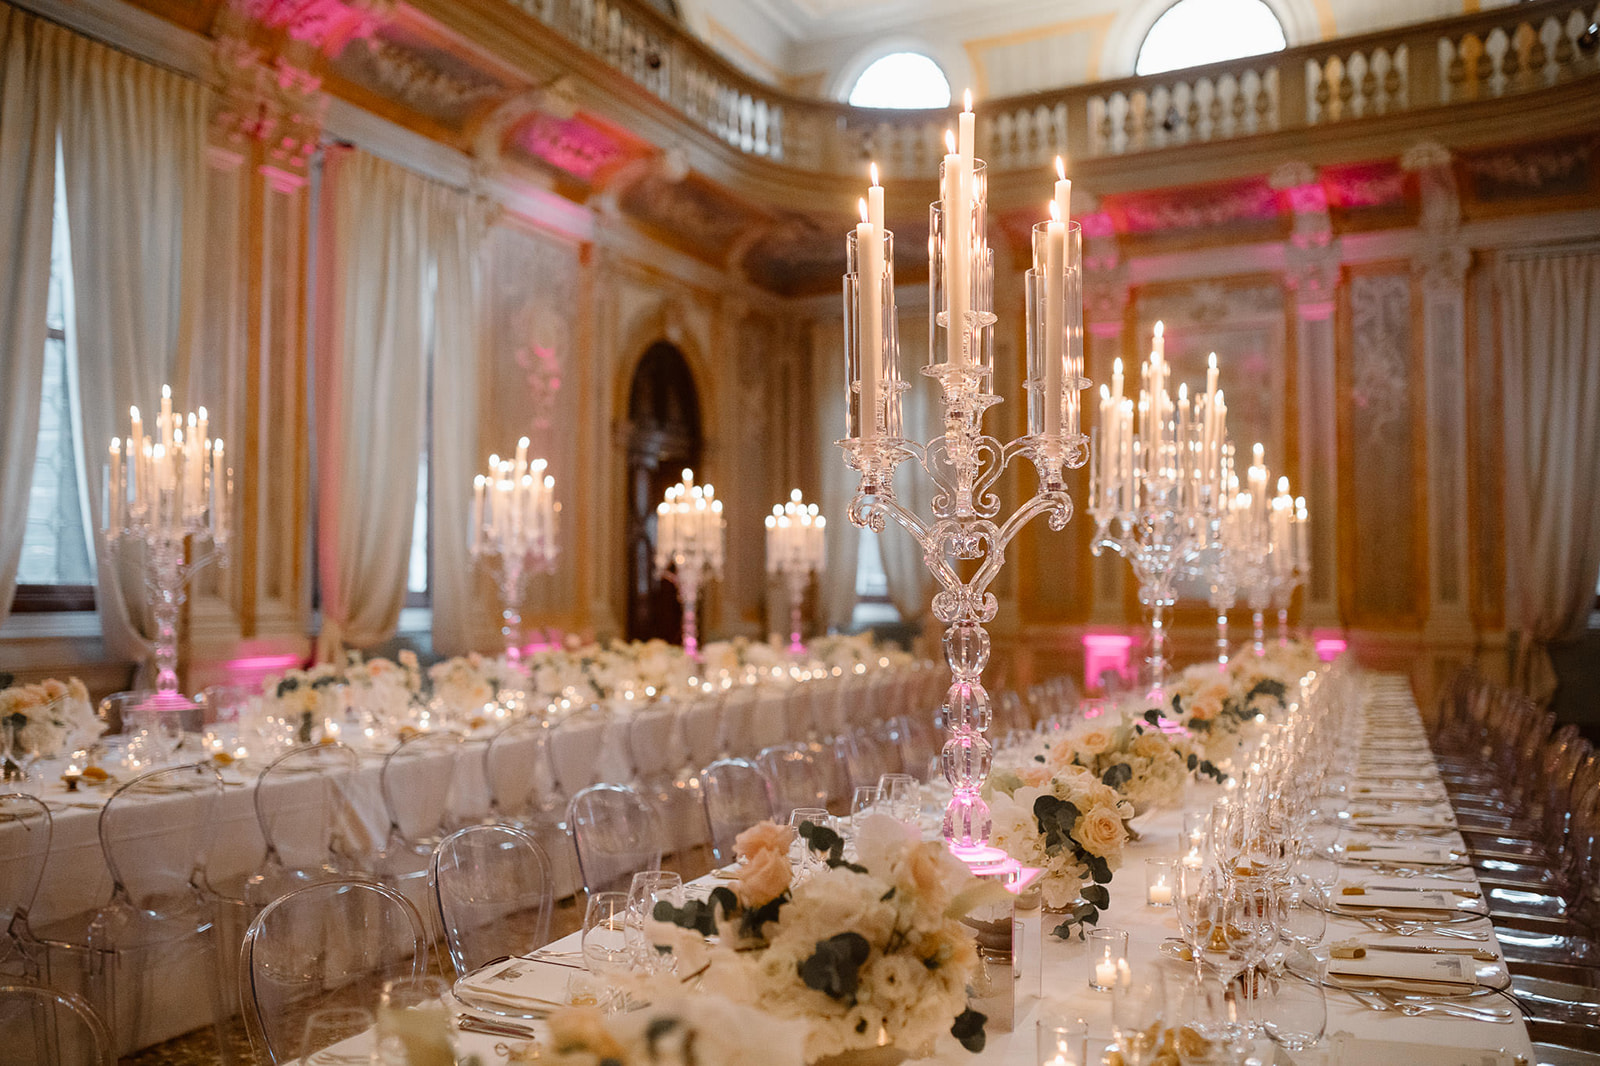 Chandeliers and color lights at the wedding dinner, the settings is made by Brilliant Weddings Venice